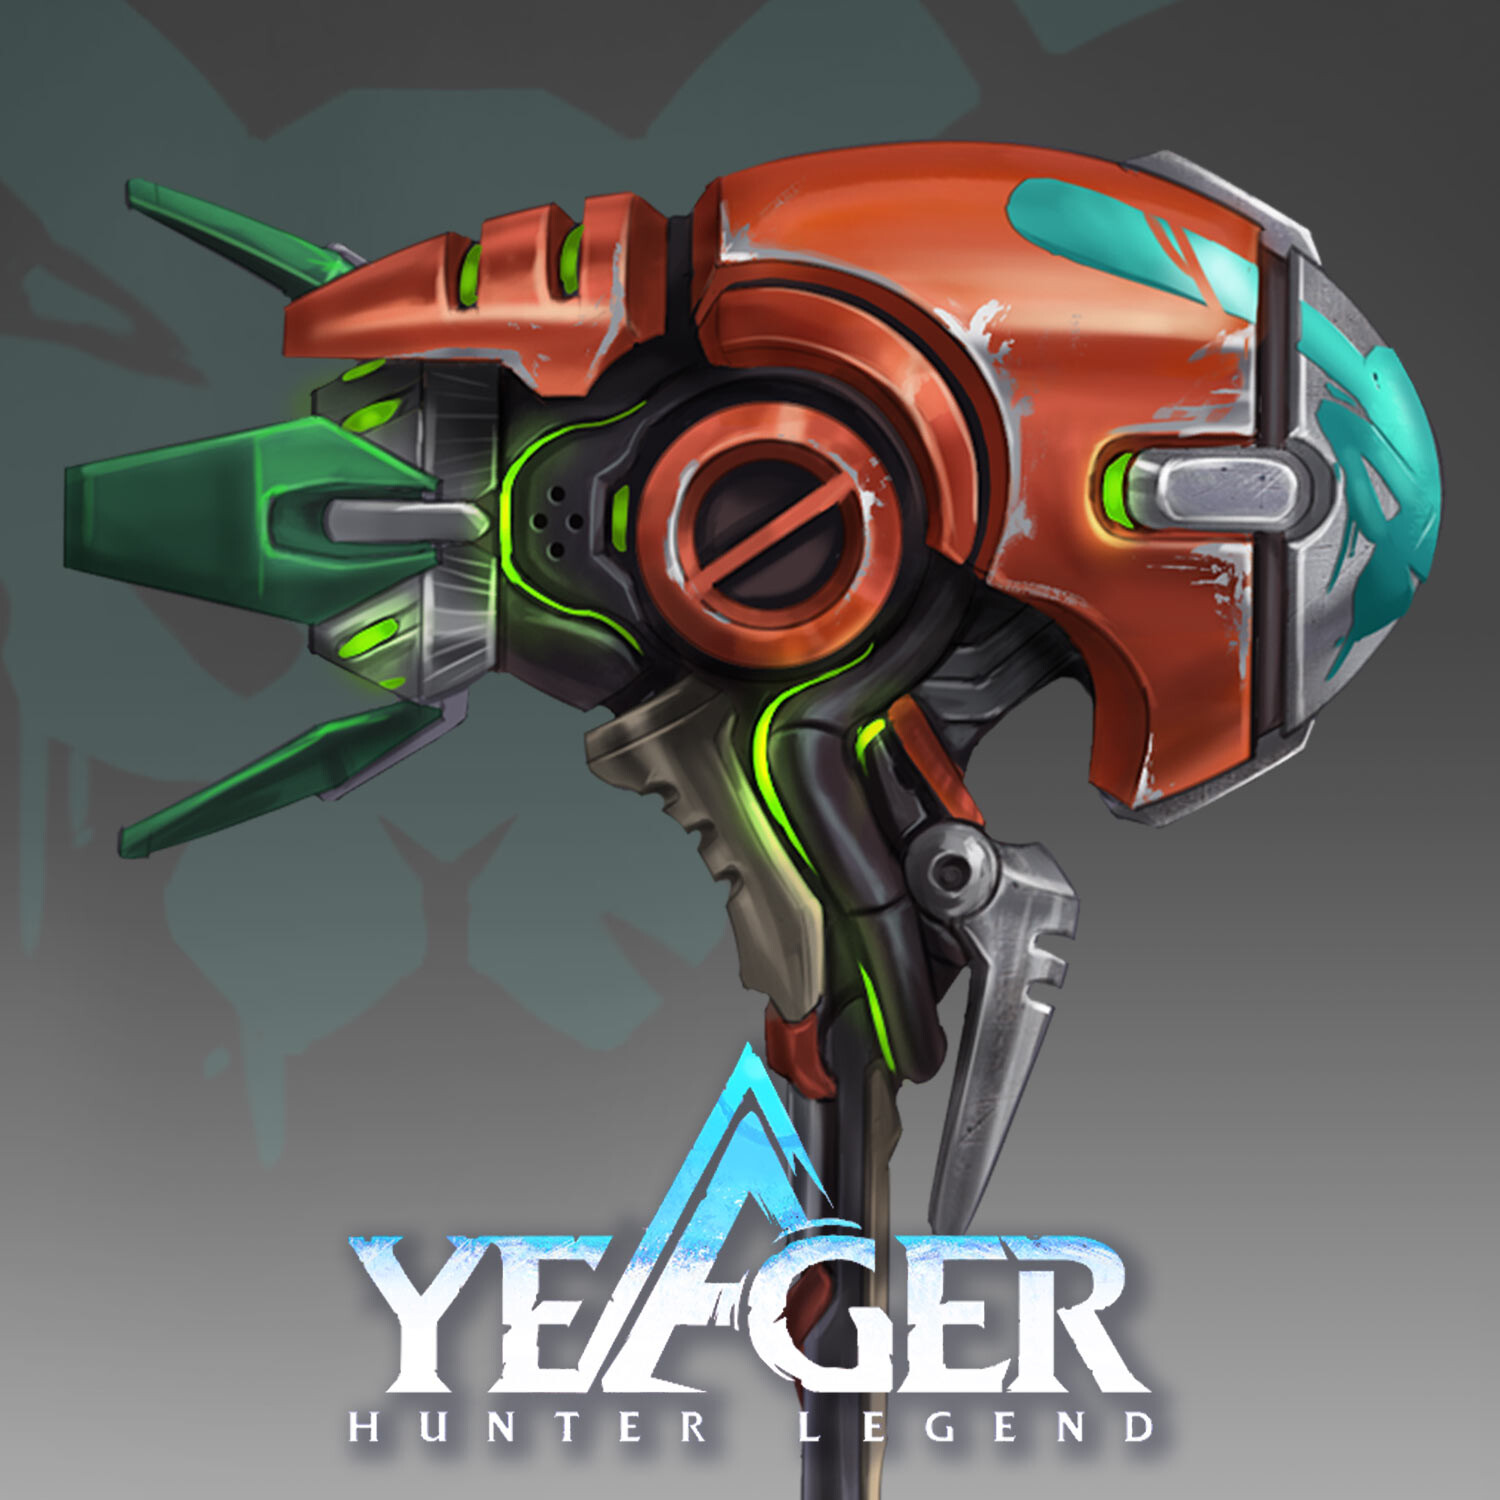 Weapon design - Easter edition YEAGER HUNTER LEGEND